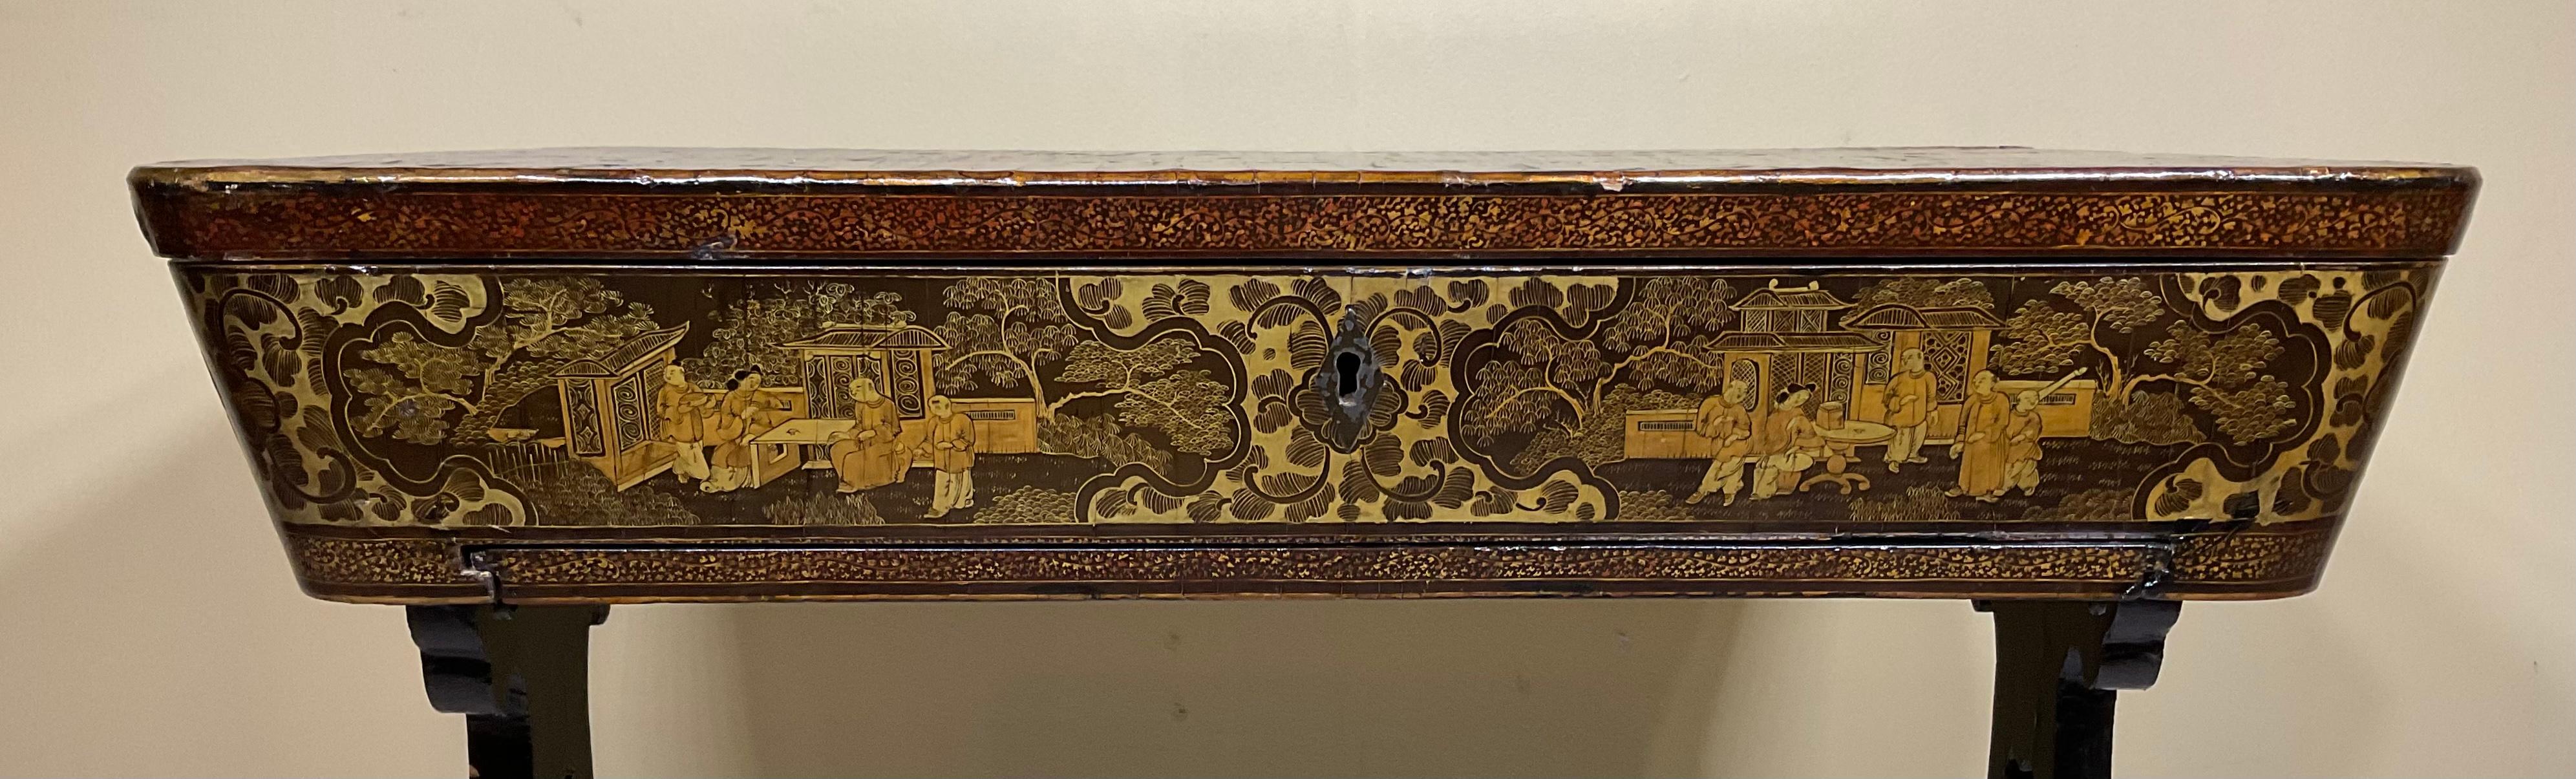 Antique 19th Century Chinese Gilt Lacquer Sewing Table 14